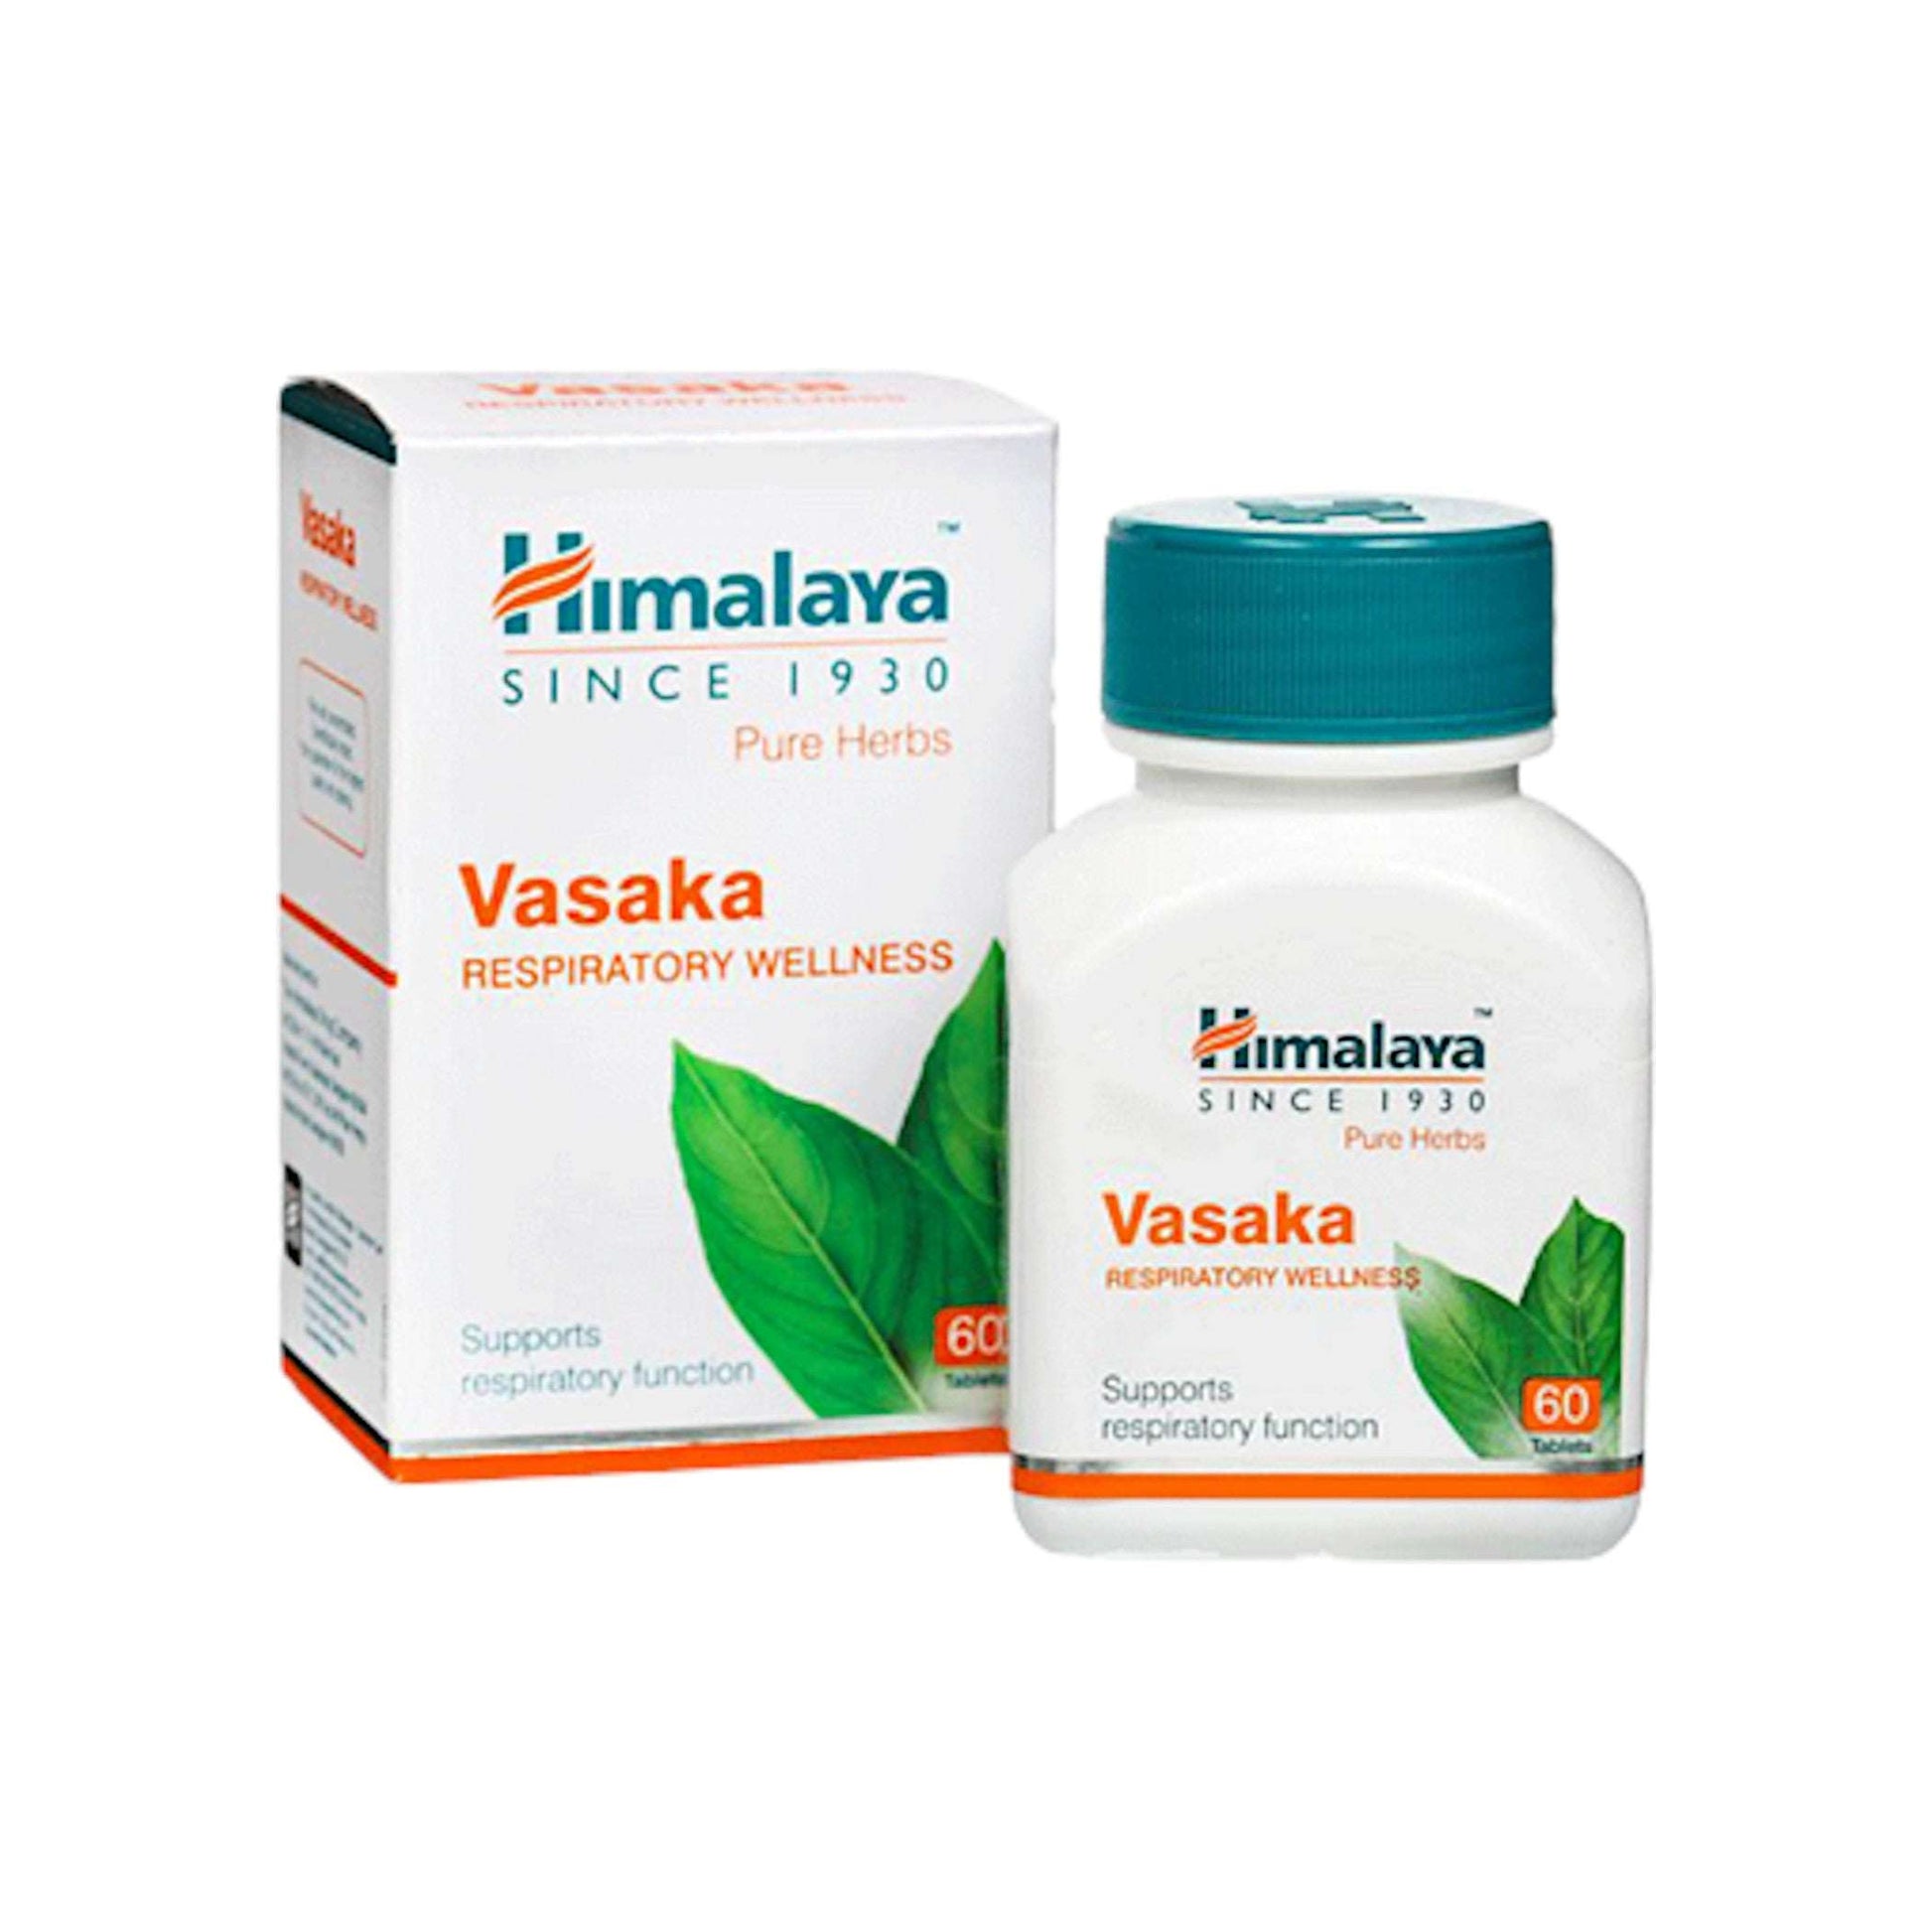 Image: Himalaya Vasaka 60 Capsules - Supports respiratory health, relieves coughs, and offers anti-inflammatory benefits.